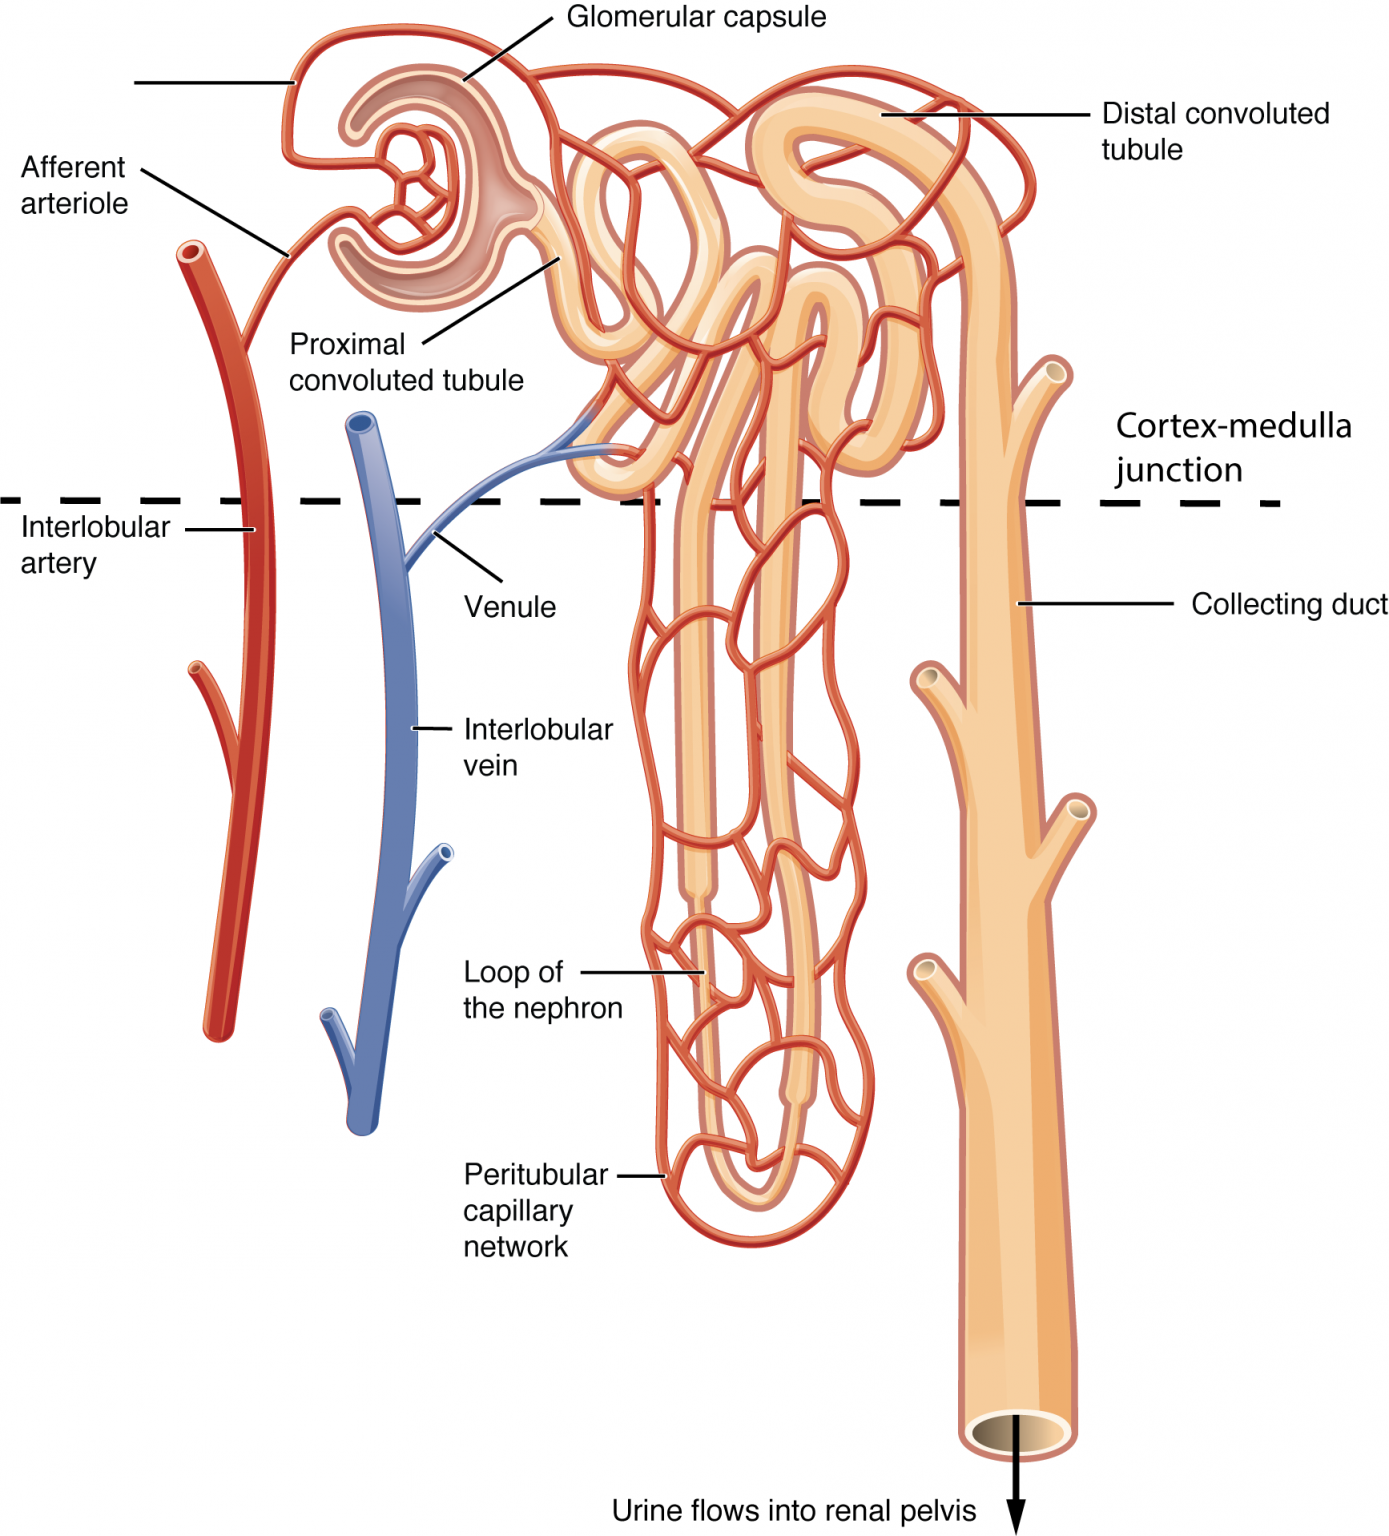 Nephron What is the Structure and its Functions of Nephron?